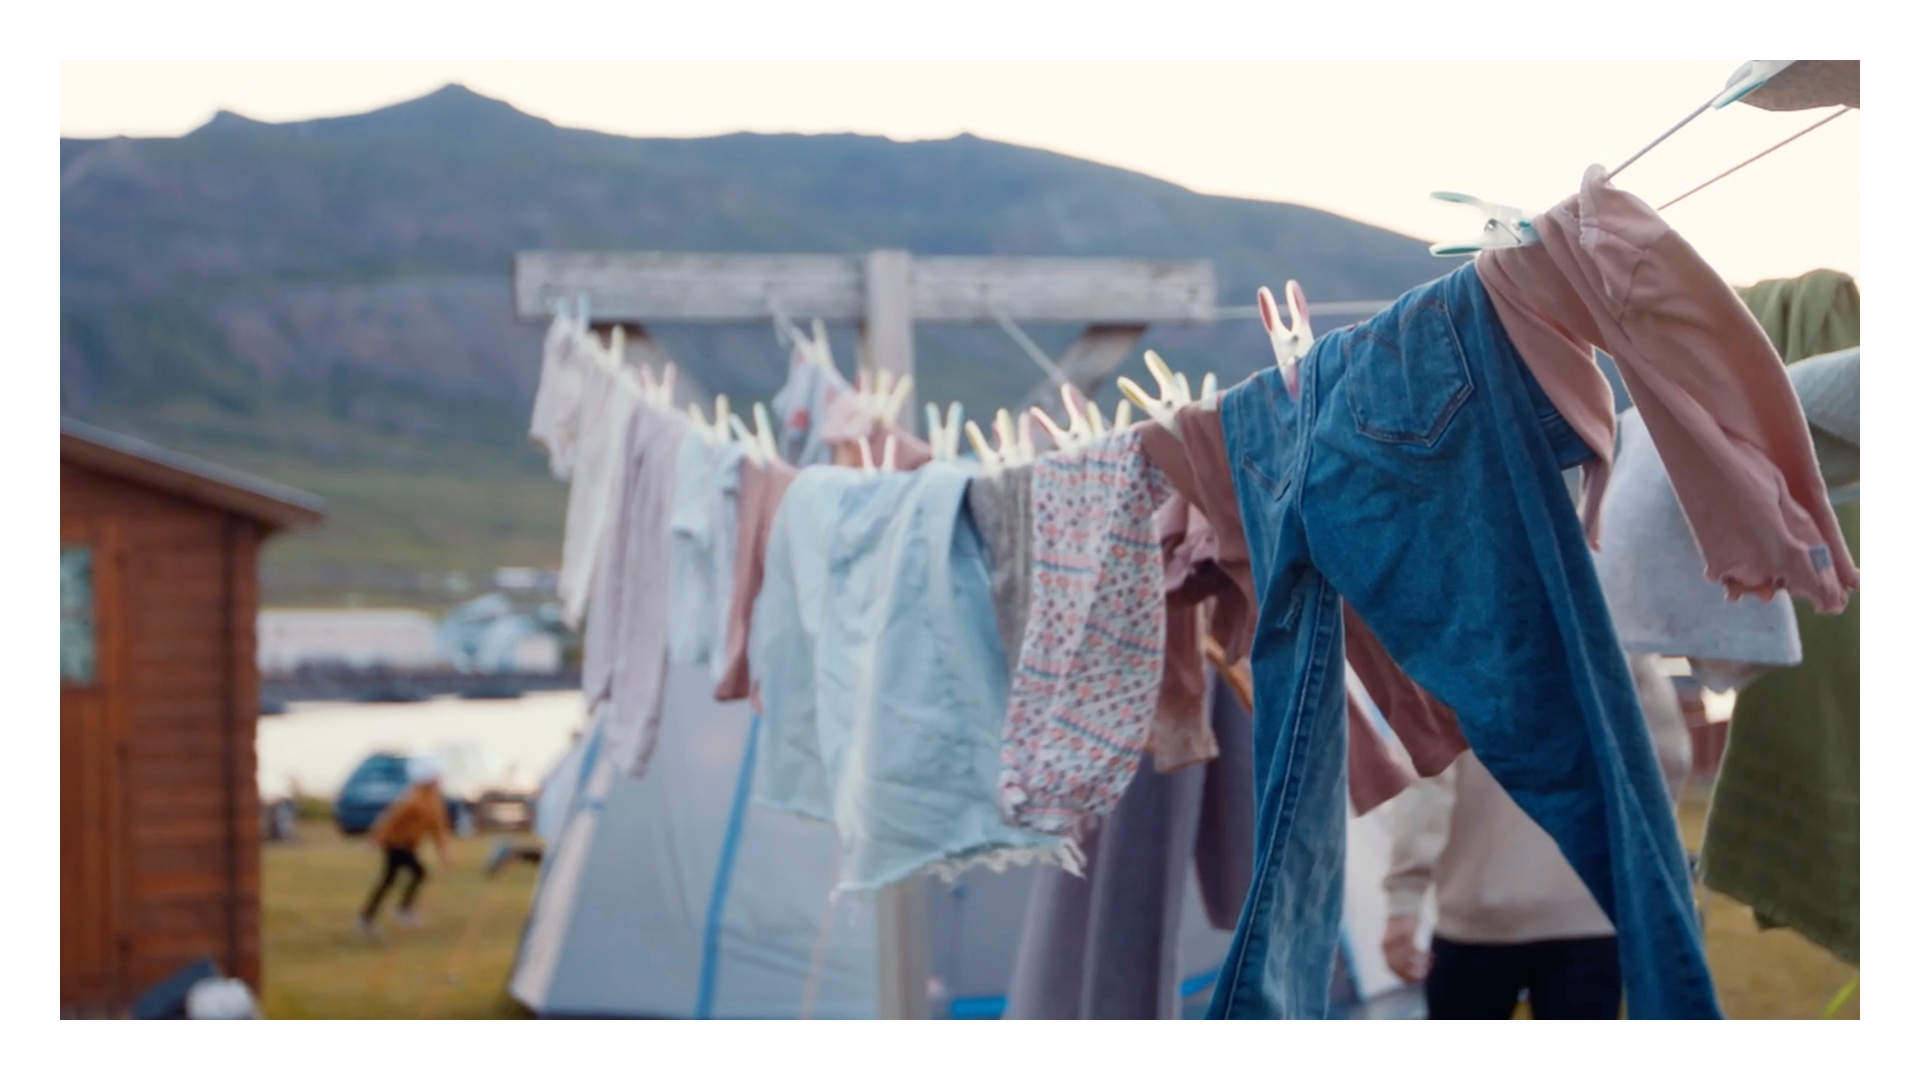 A local family dries their washing on the washing line, with the mountains of Borgarfjordur Eystri in the background